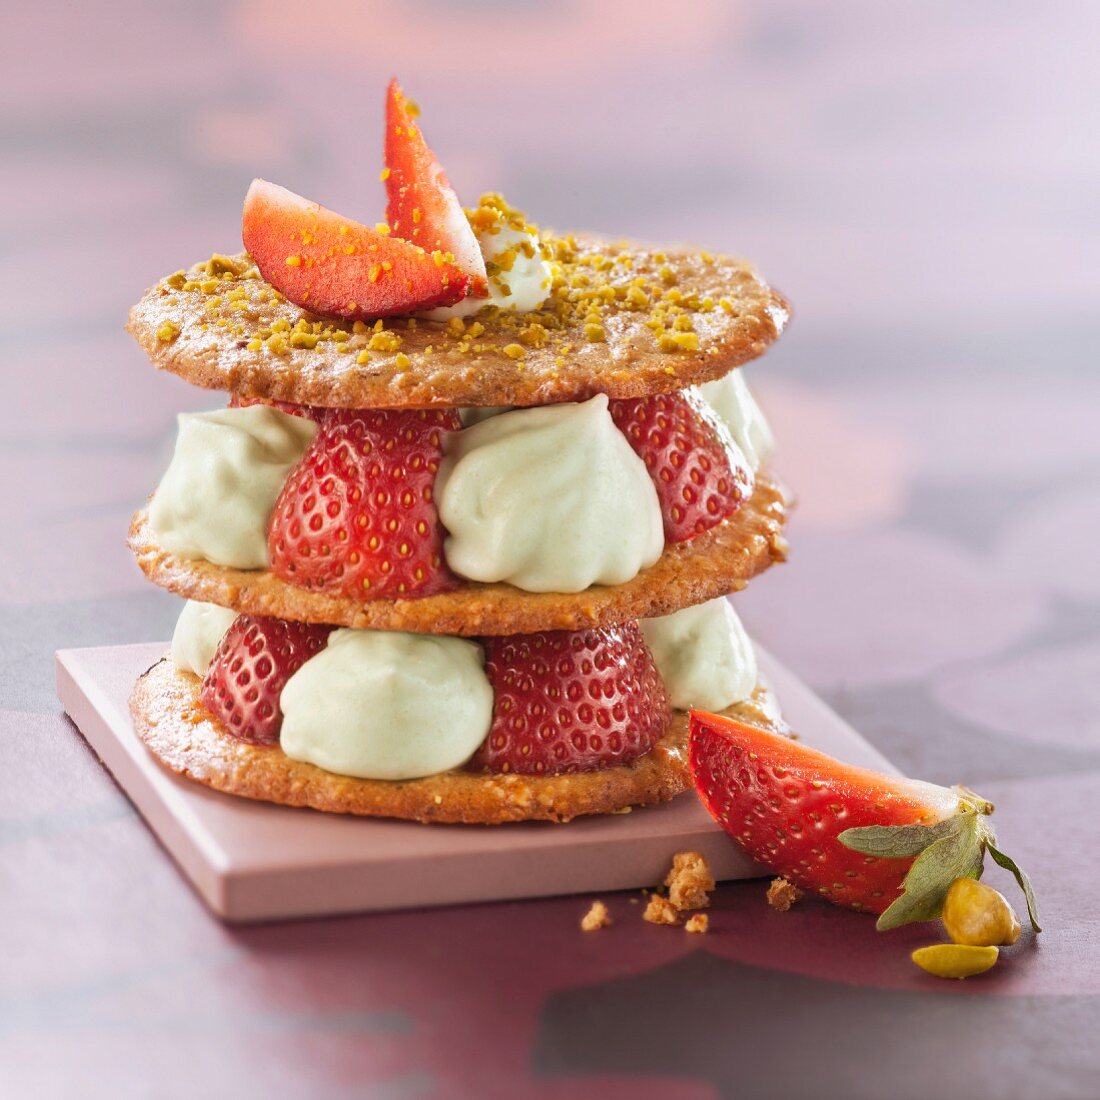 Crunchy pastry, strawberry and pistachio whipped cream dessert